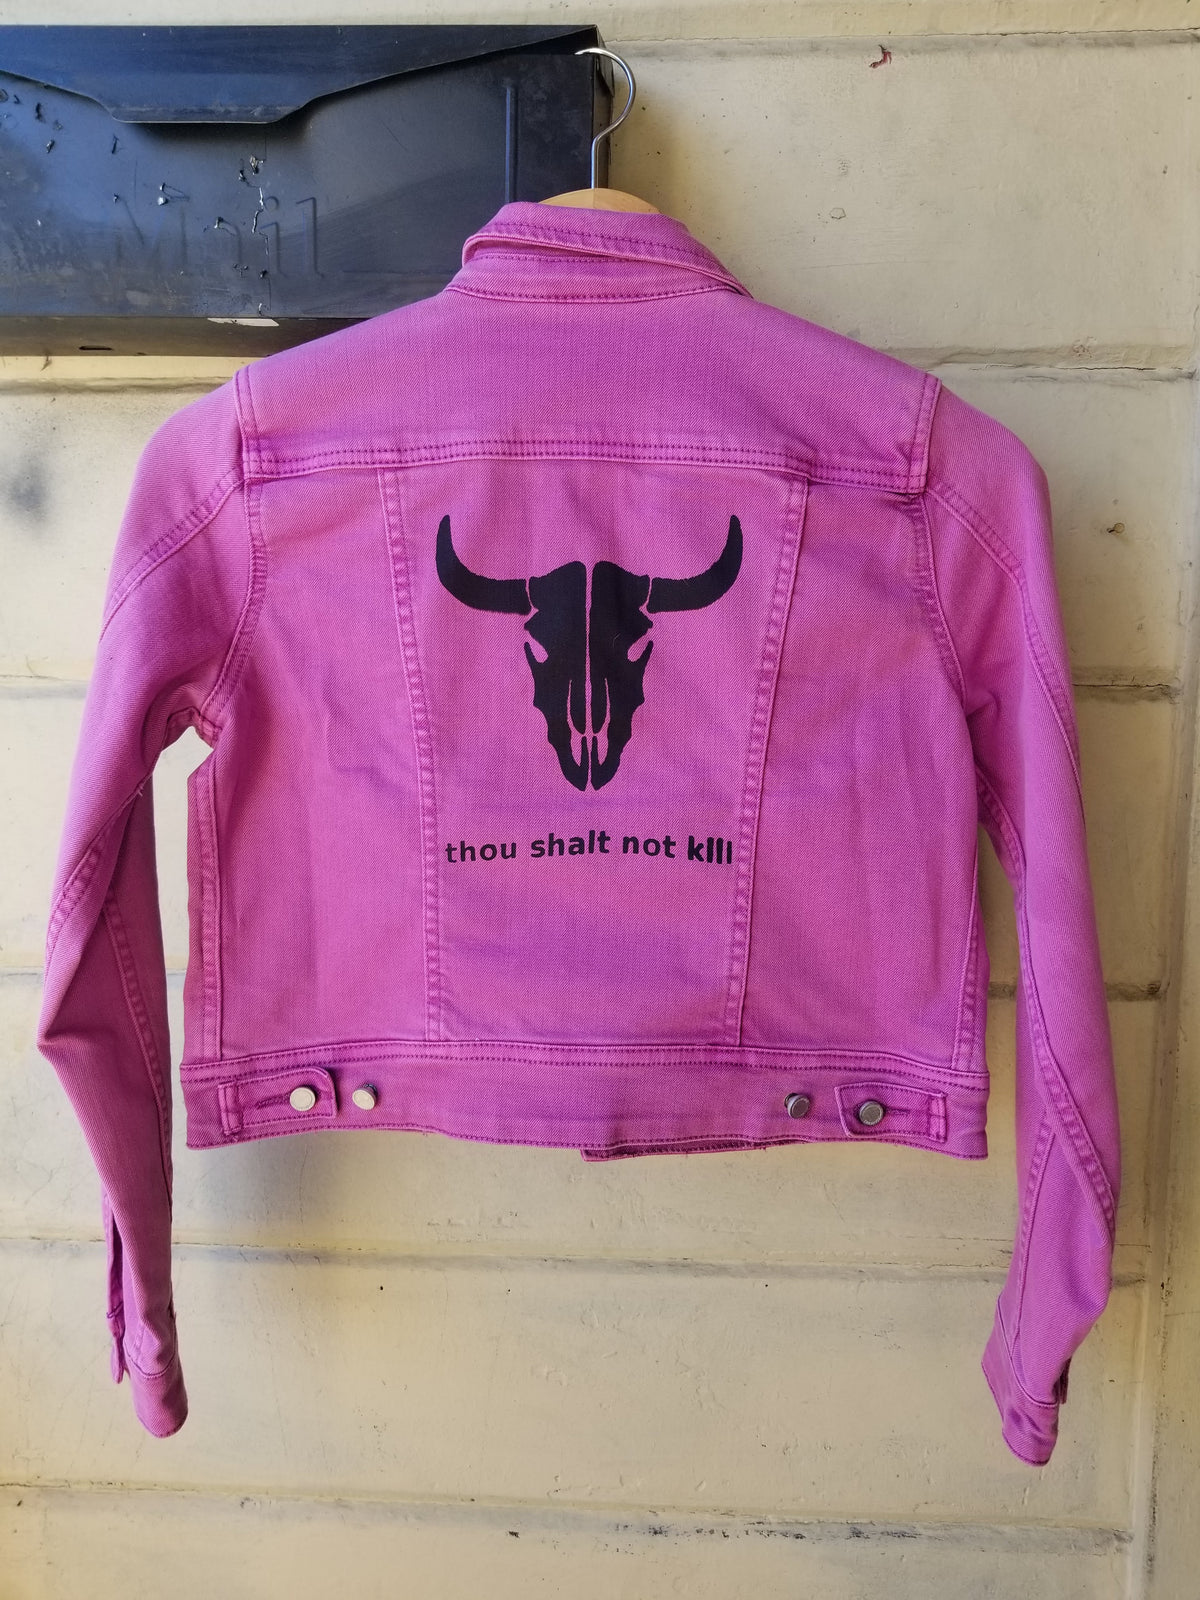 SOLD - One of a Kind Upcycled Purple Jean Jacket Vegan Club featuring a Cow "Thou Shalt Not Kill"